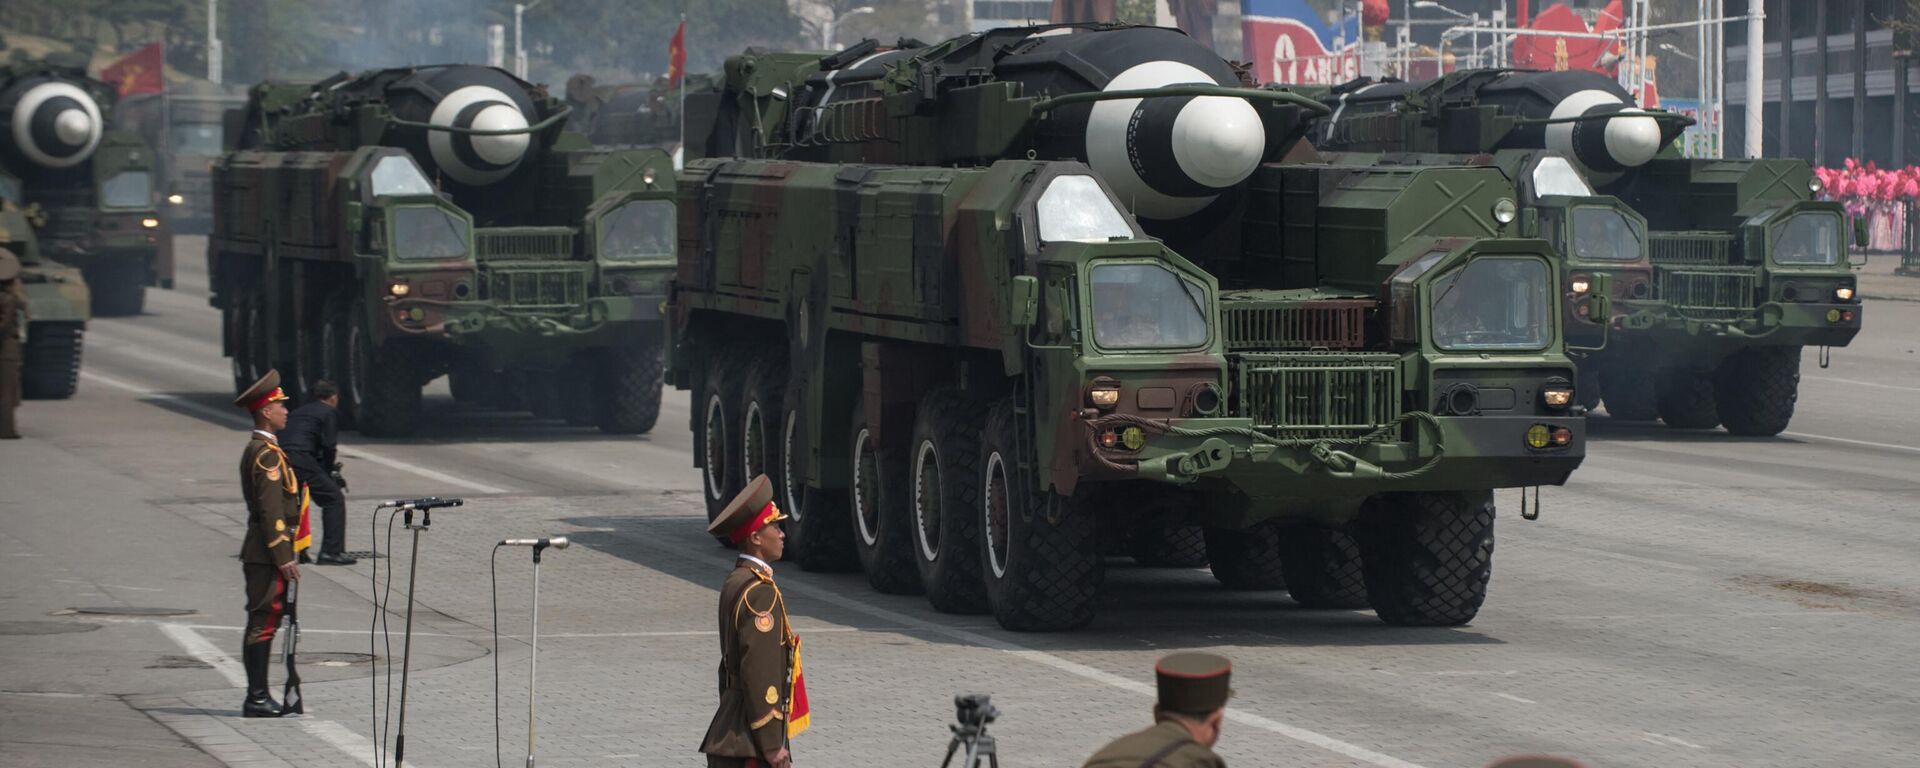 This picture taken on April 15, 2017 shows an unidentified rocket, reported to be a Hwasong-type missile similar to the one used in a May 14, 2017 test launch, at a military parade in Pyongyang - Sputnik International, 1920, 18.02.2023